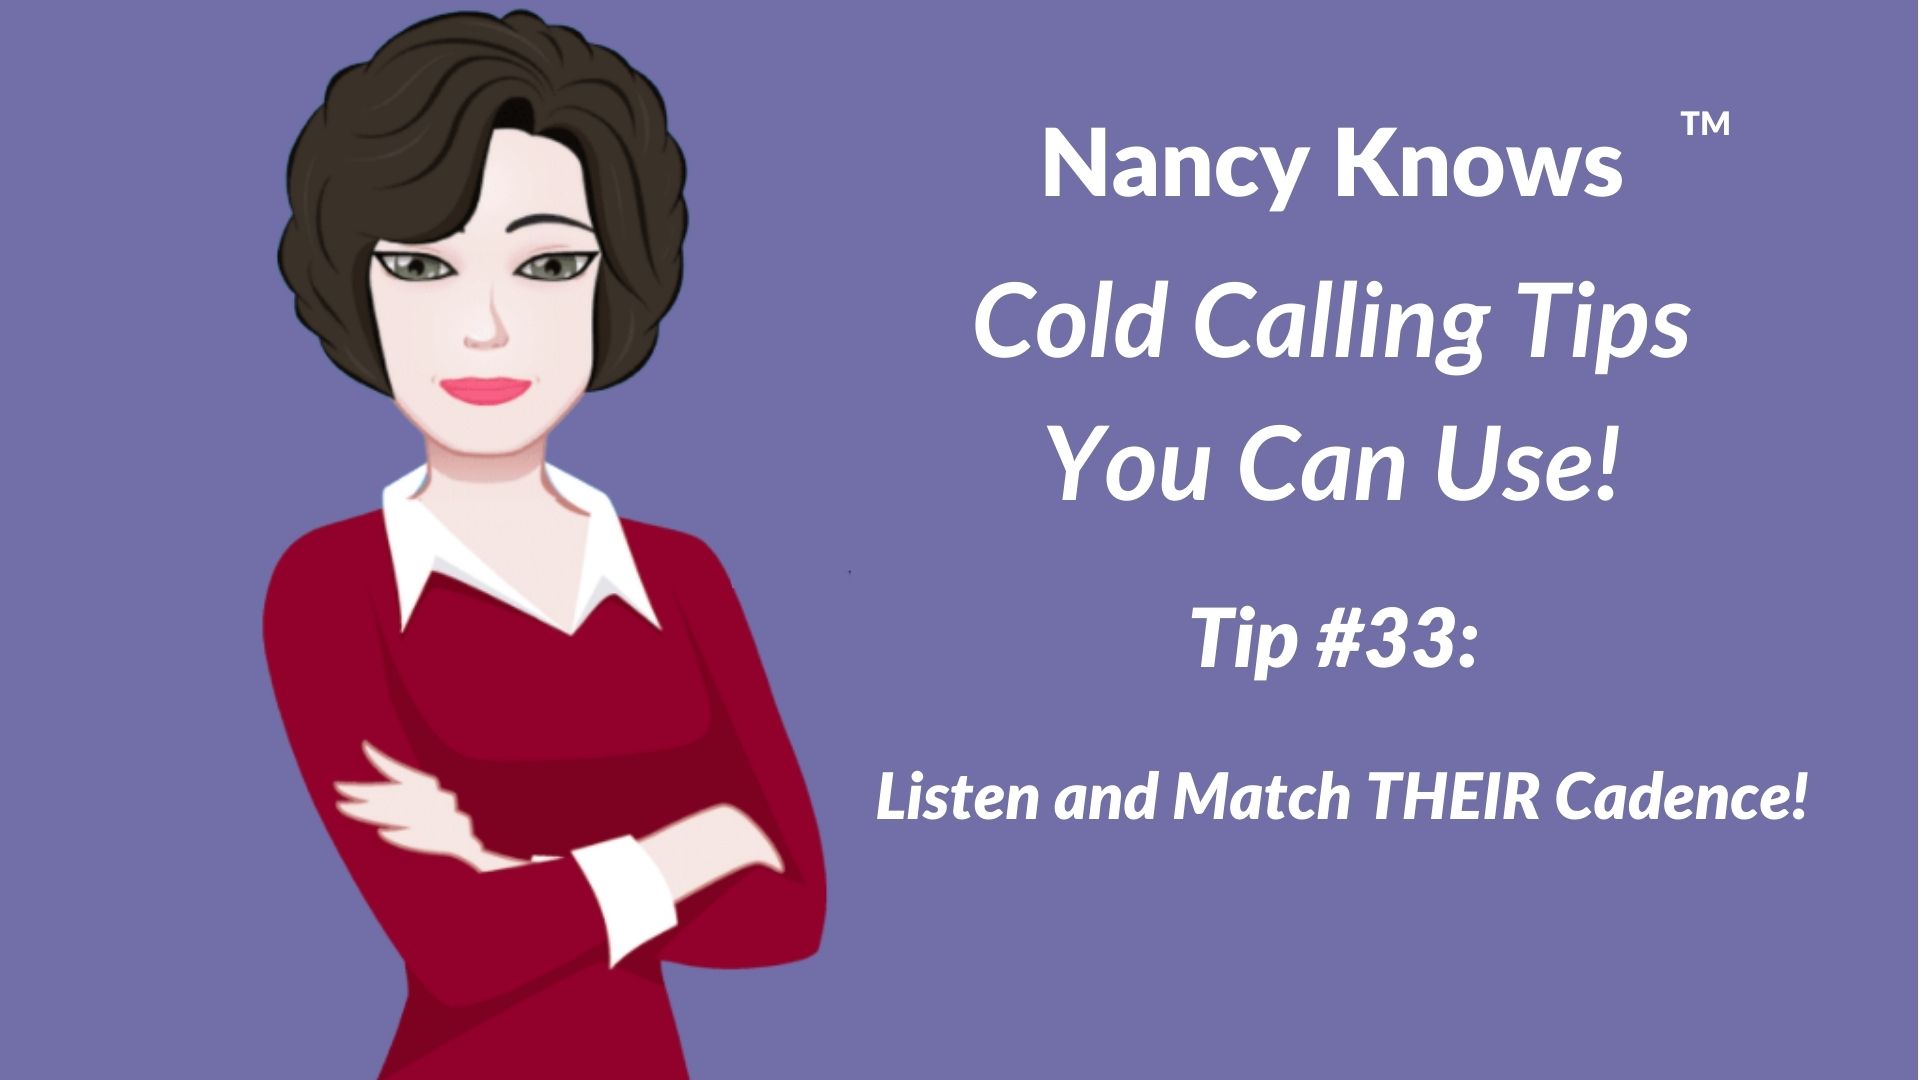 Nancy Knows #33: Listen and Match THEIR Cadence